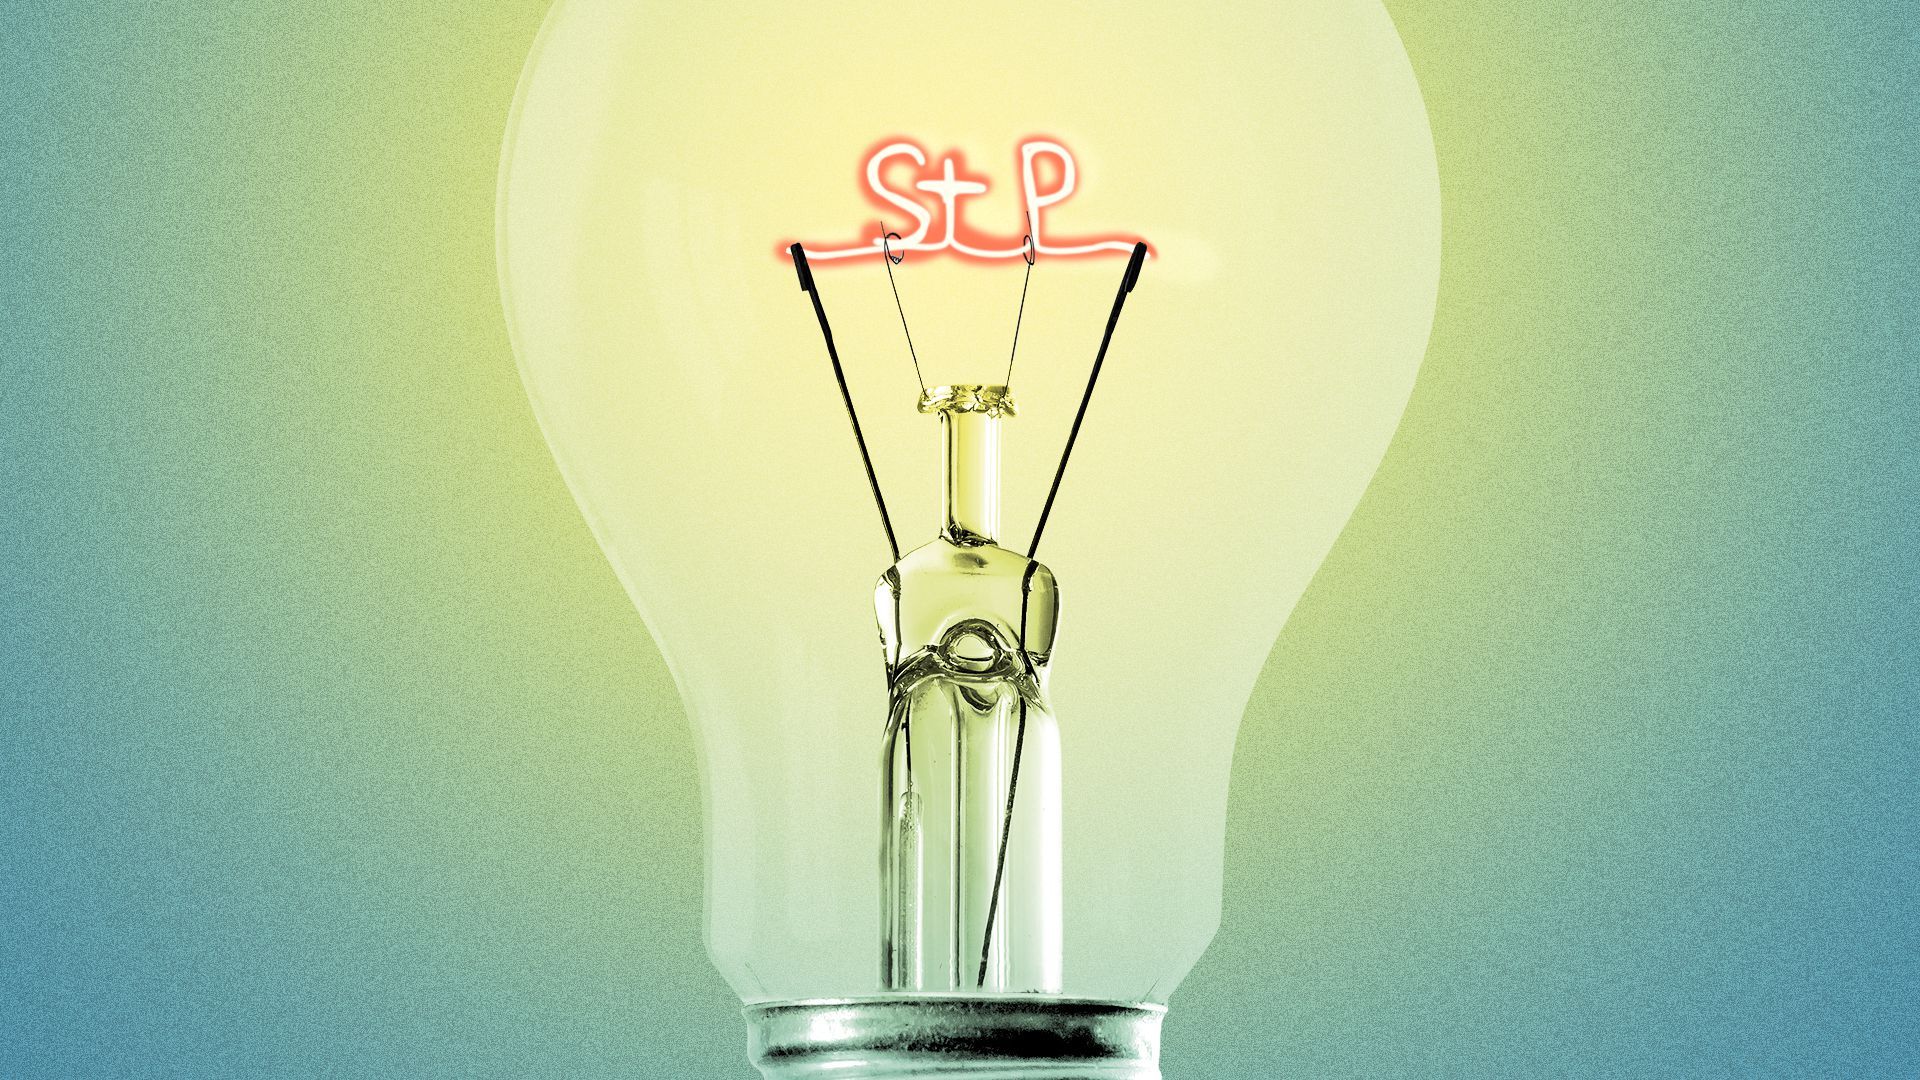 Illustration of a light bulb with the filament twisted to spell St P.